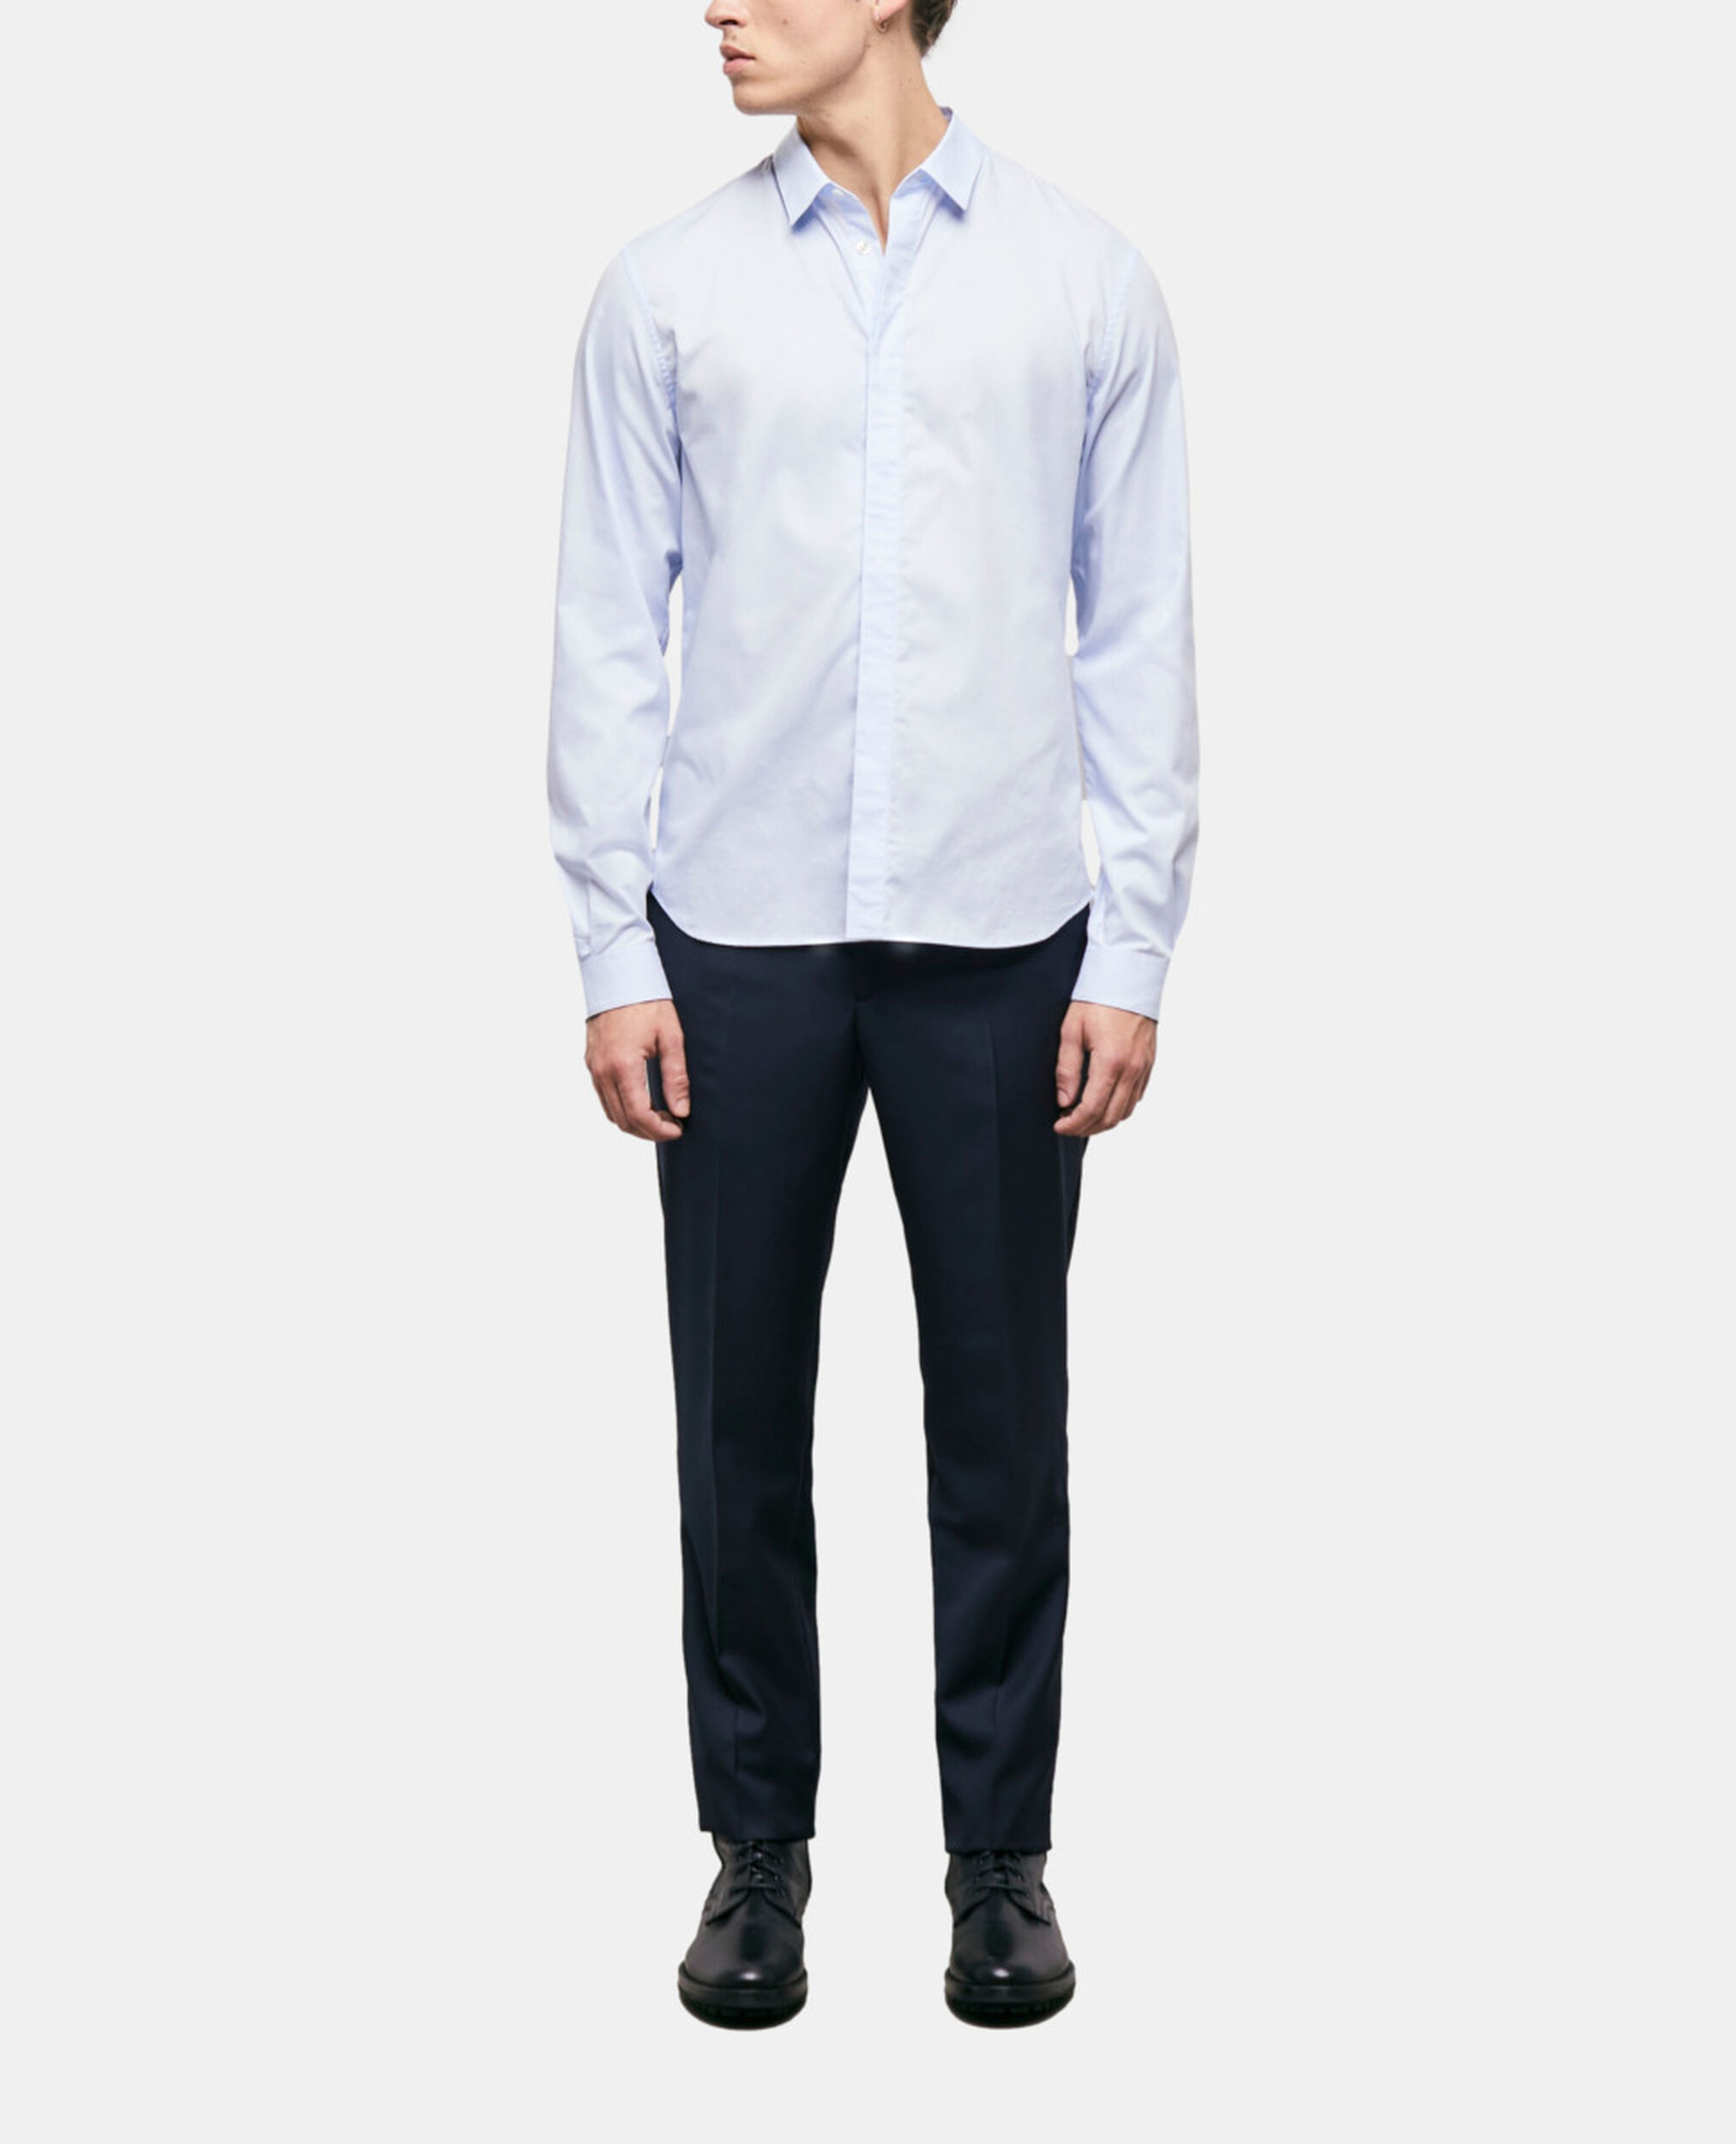 Blue cotton shirt with classic collar, SKY, hi-res image number null